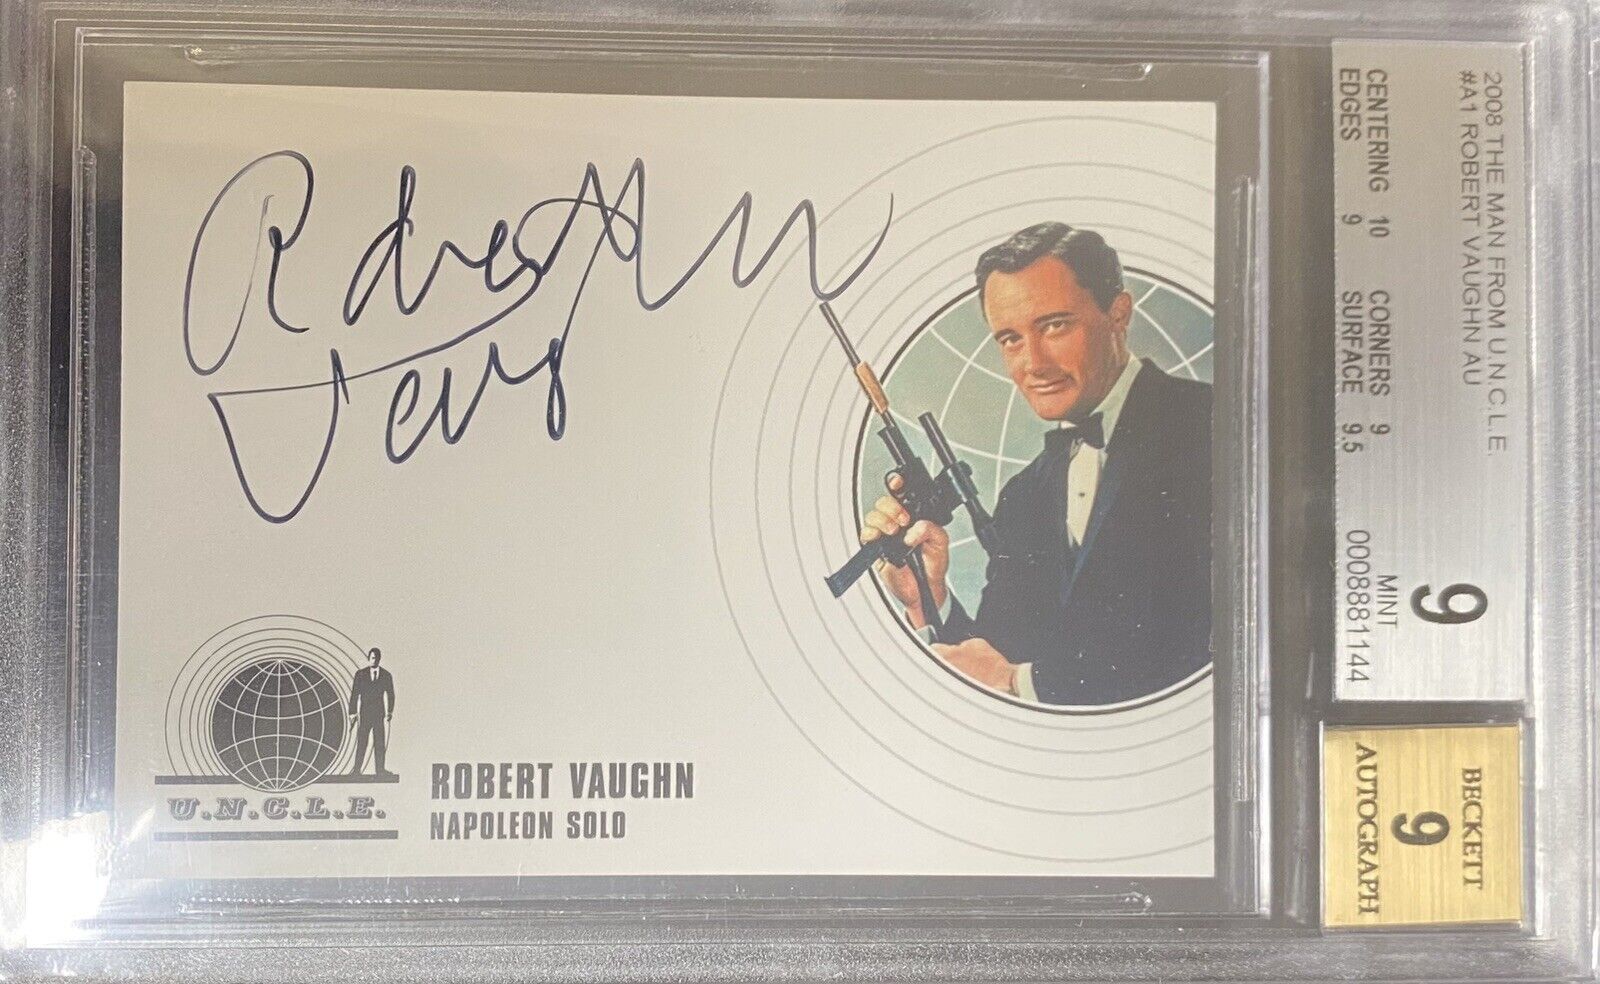 2008 Man from U.N.C.L.E. Uncle Robert Vaughn as Napoleon Solo Autograph Card A1